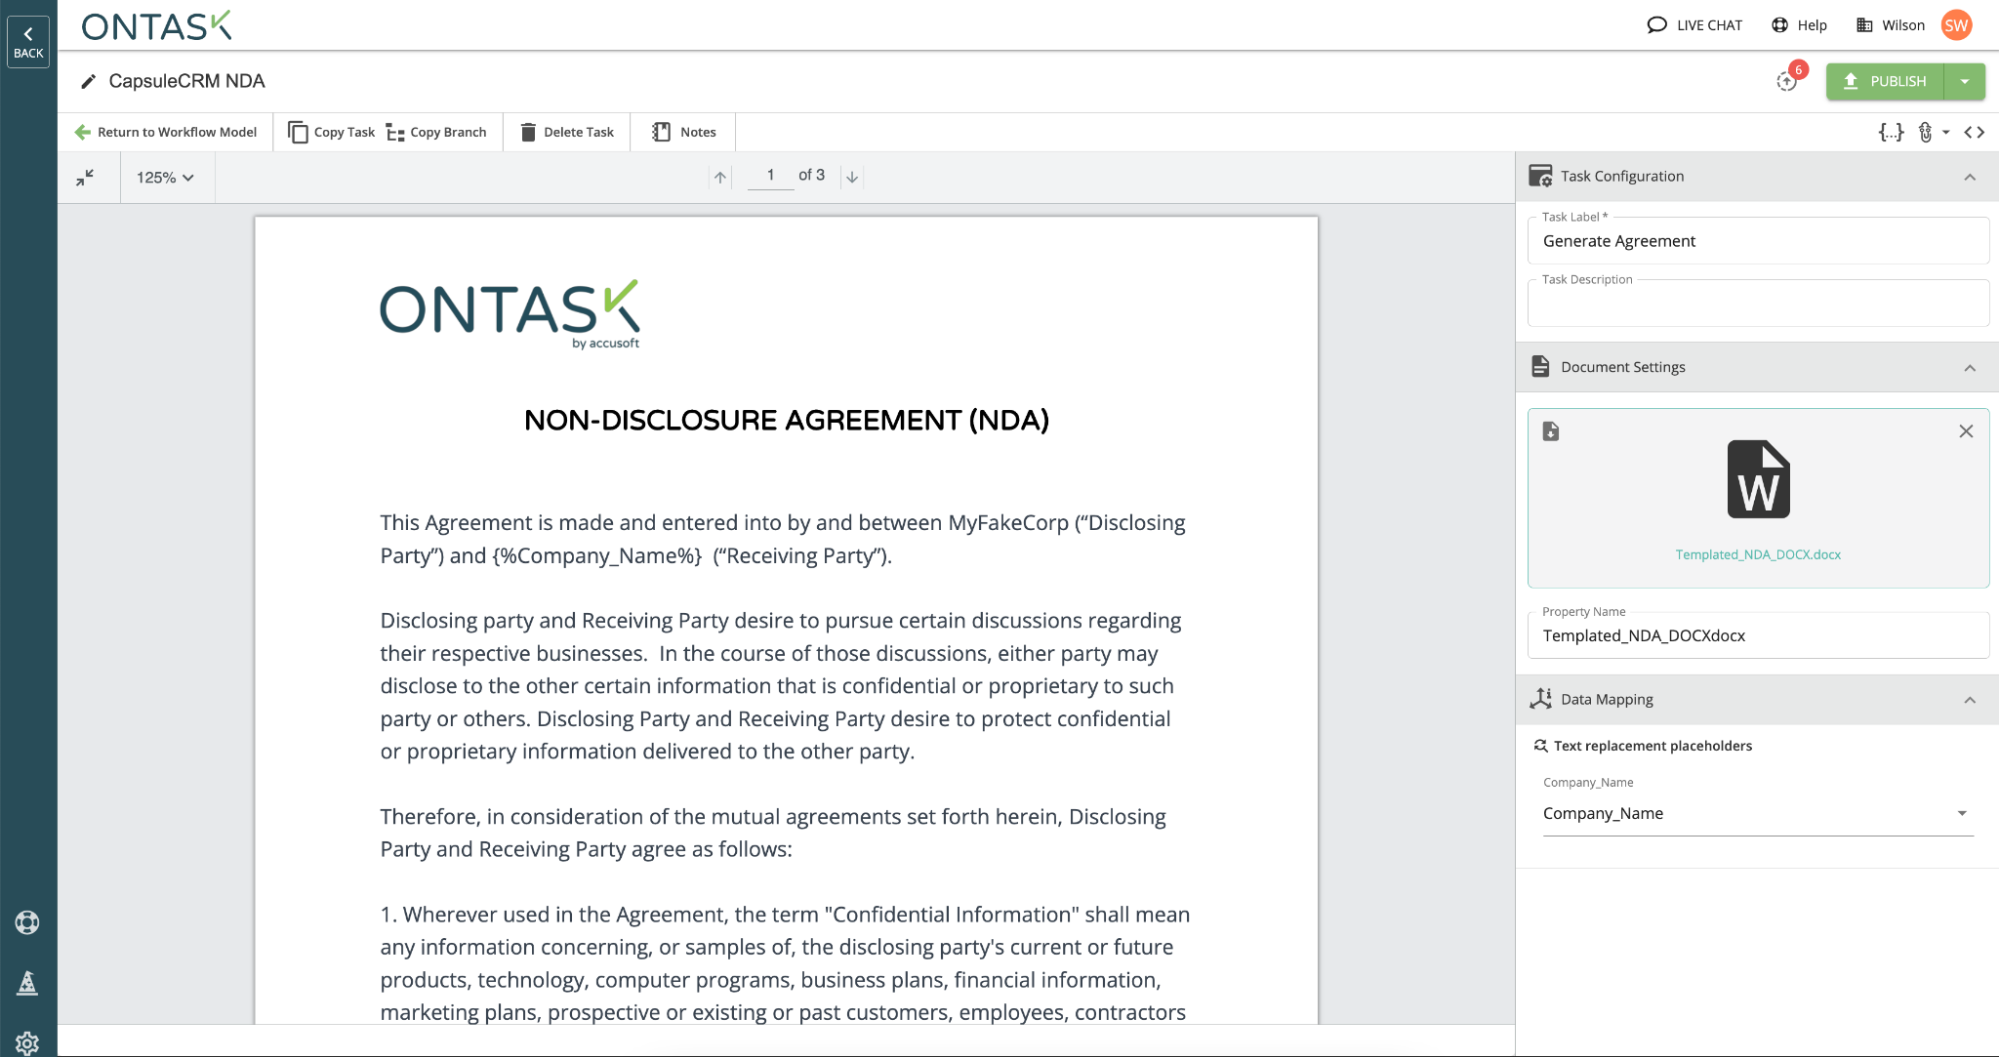 view of nda agreement document in ontask